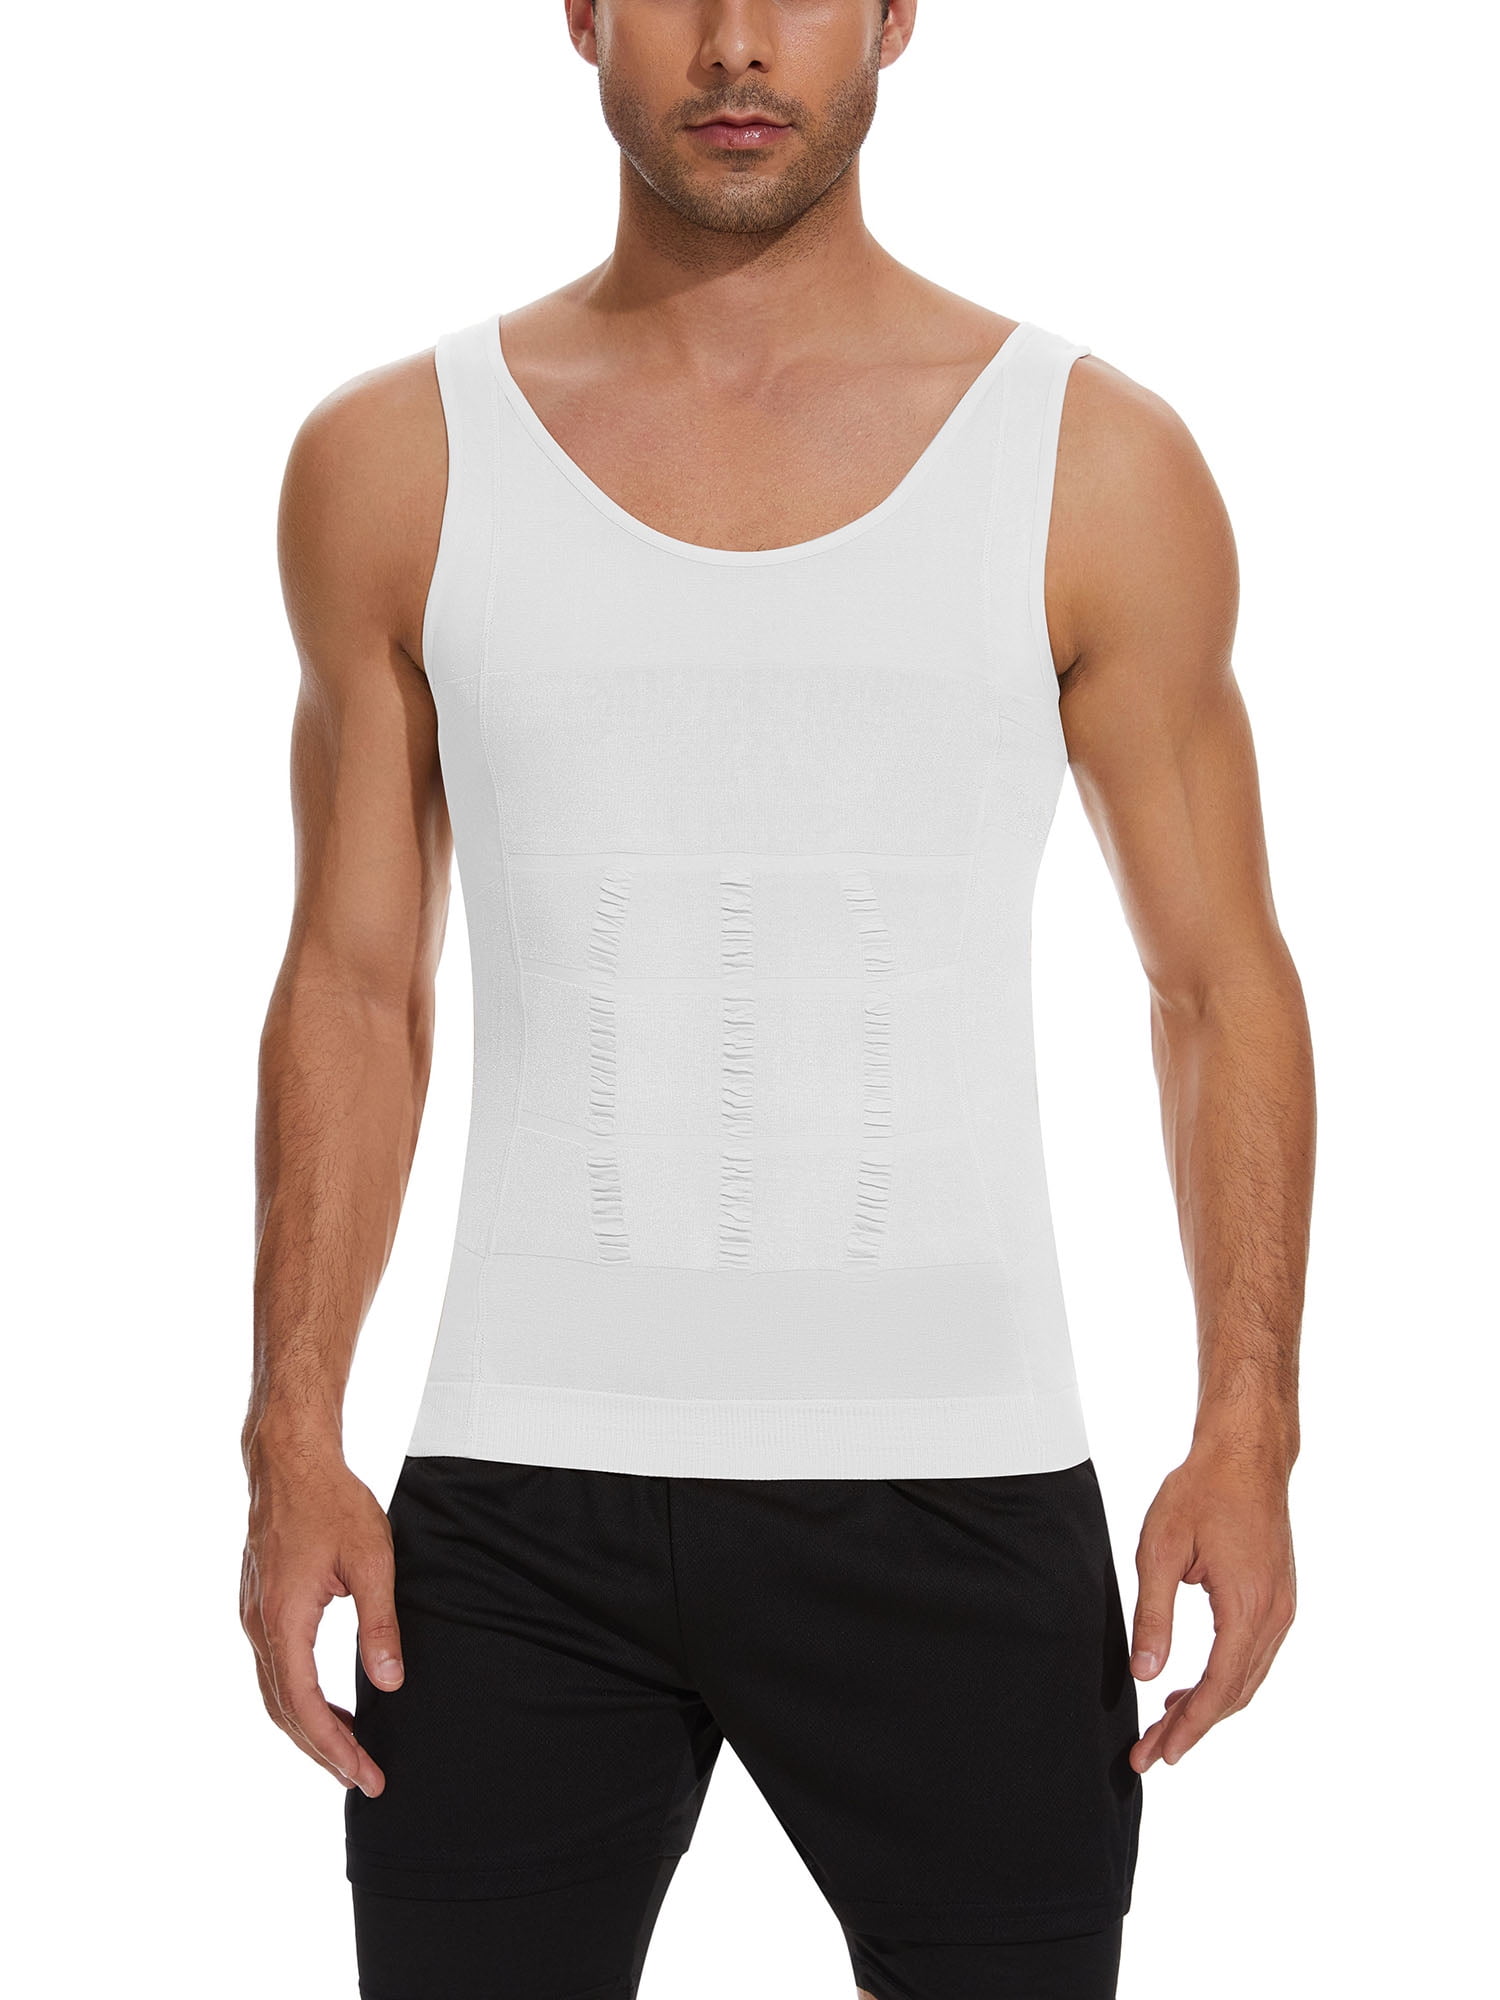 FS Men's Compression Body Shaper Sports Tank Top | Breathable & Elastic  Fabric | Instant Belly & Chest Shaping